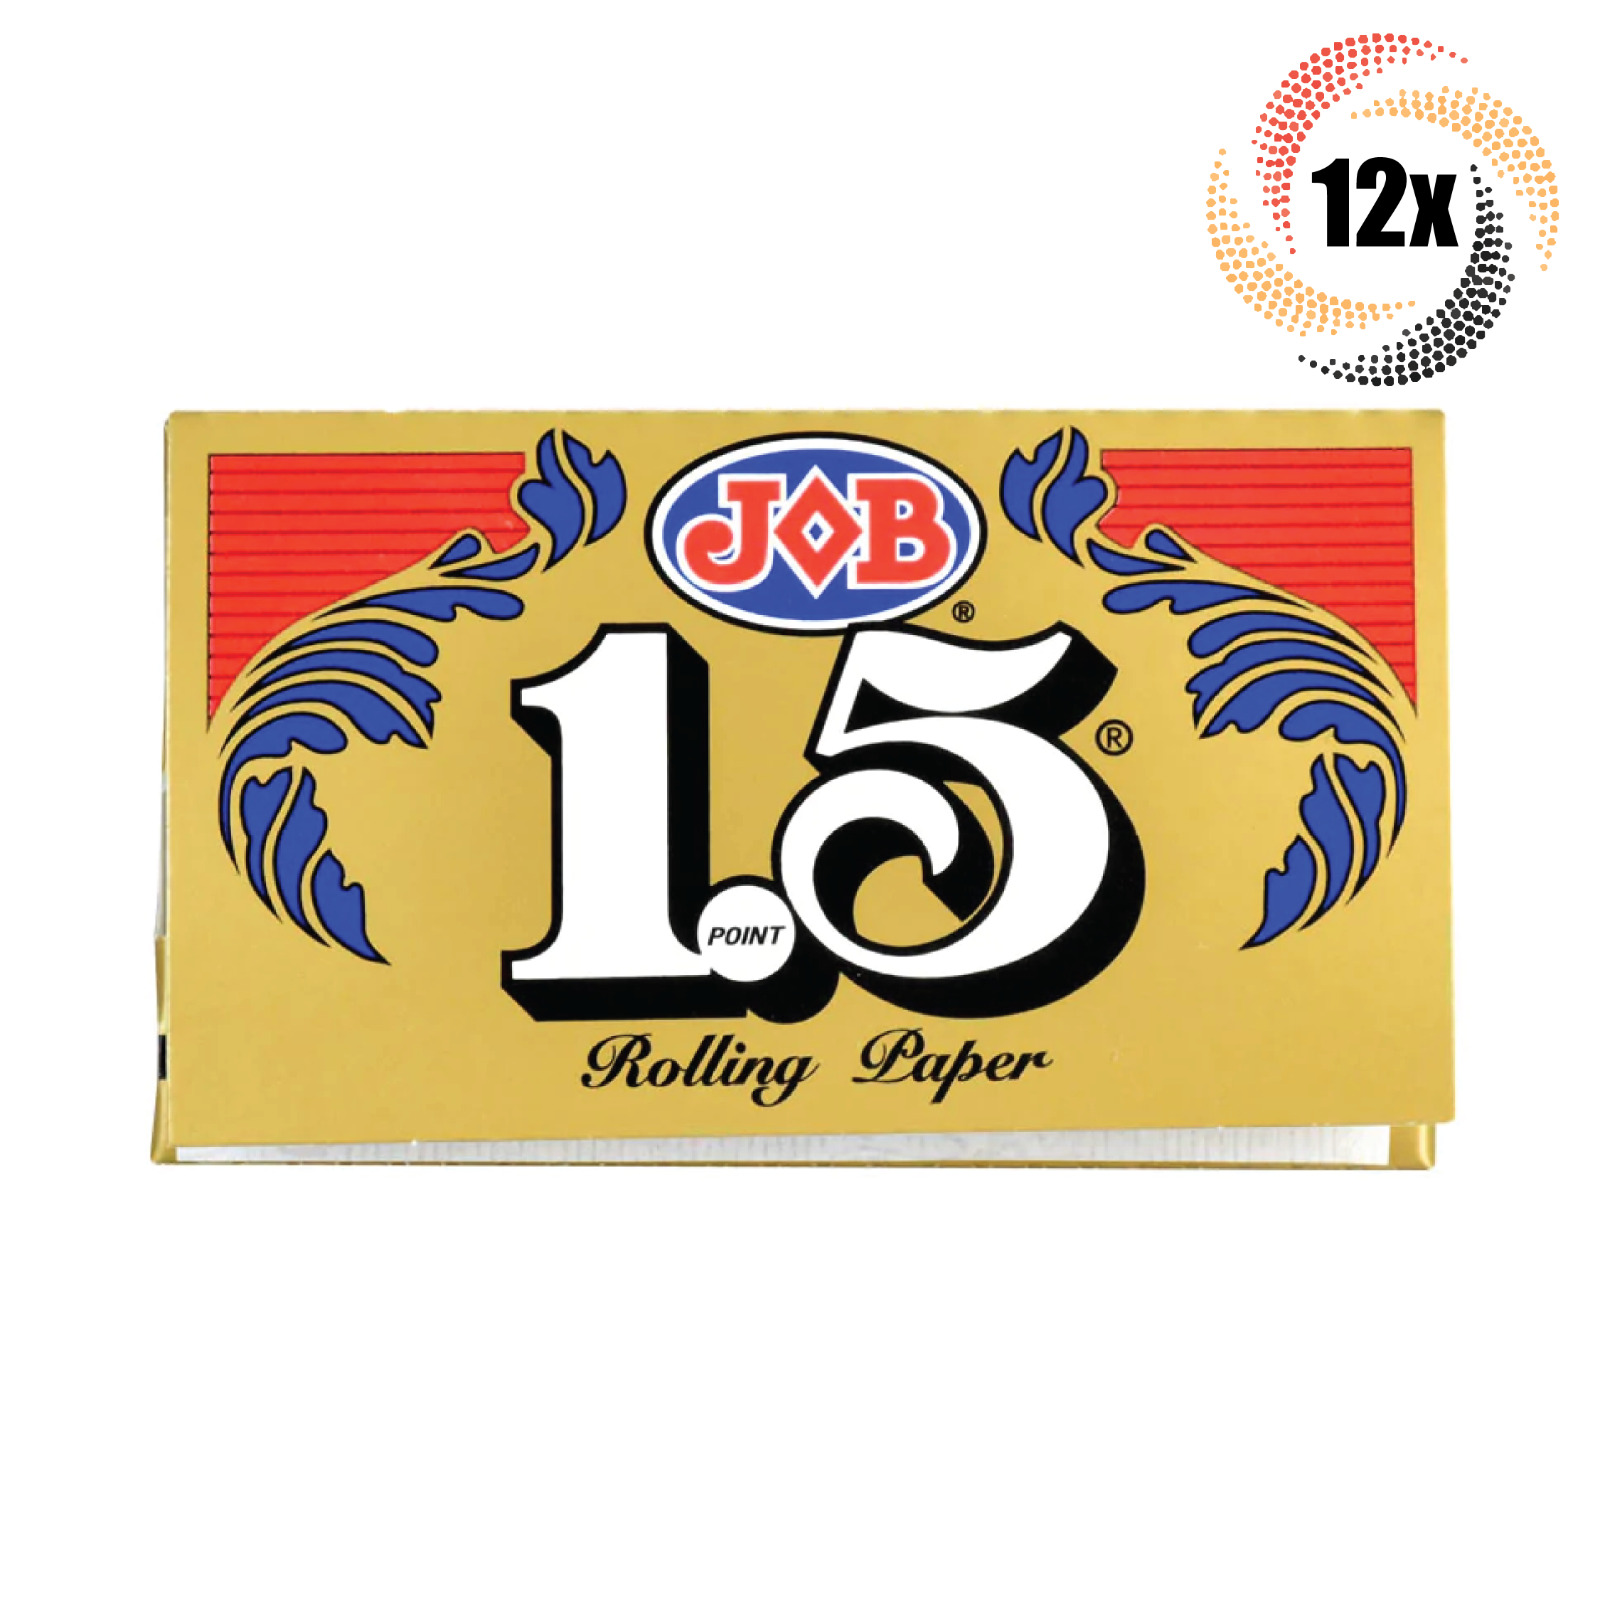 12x Packs Job Gold 1.5 | 24 Papers Per Pack | + 2 Free Rolling Tubes